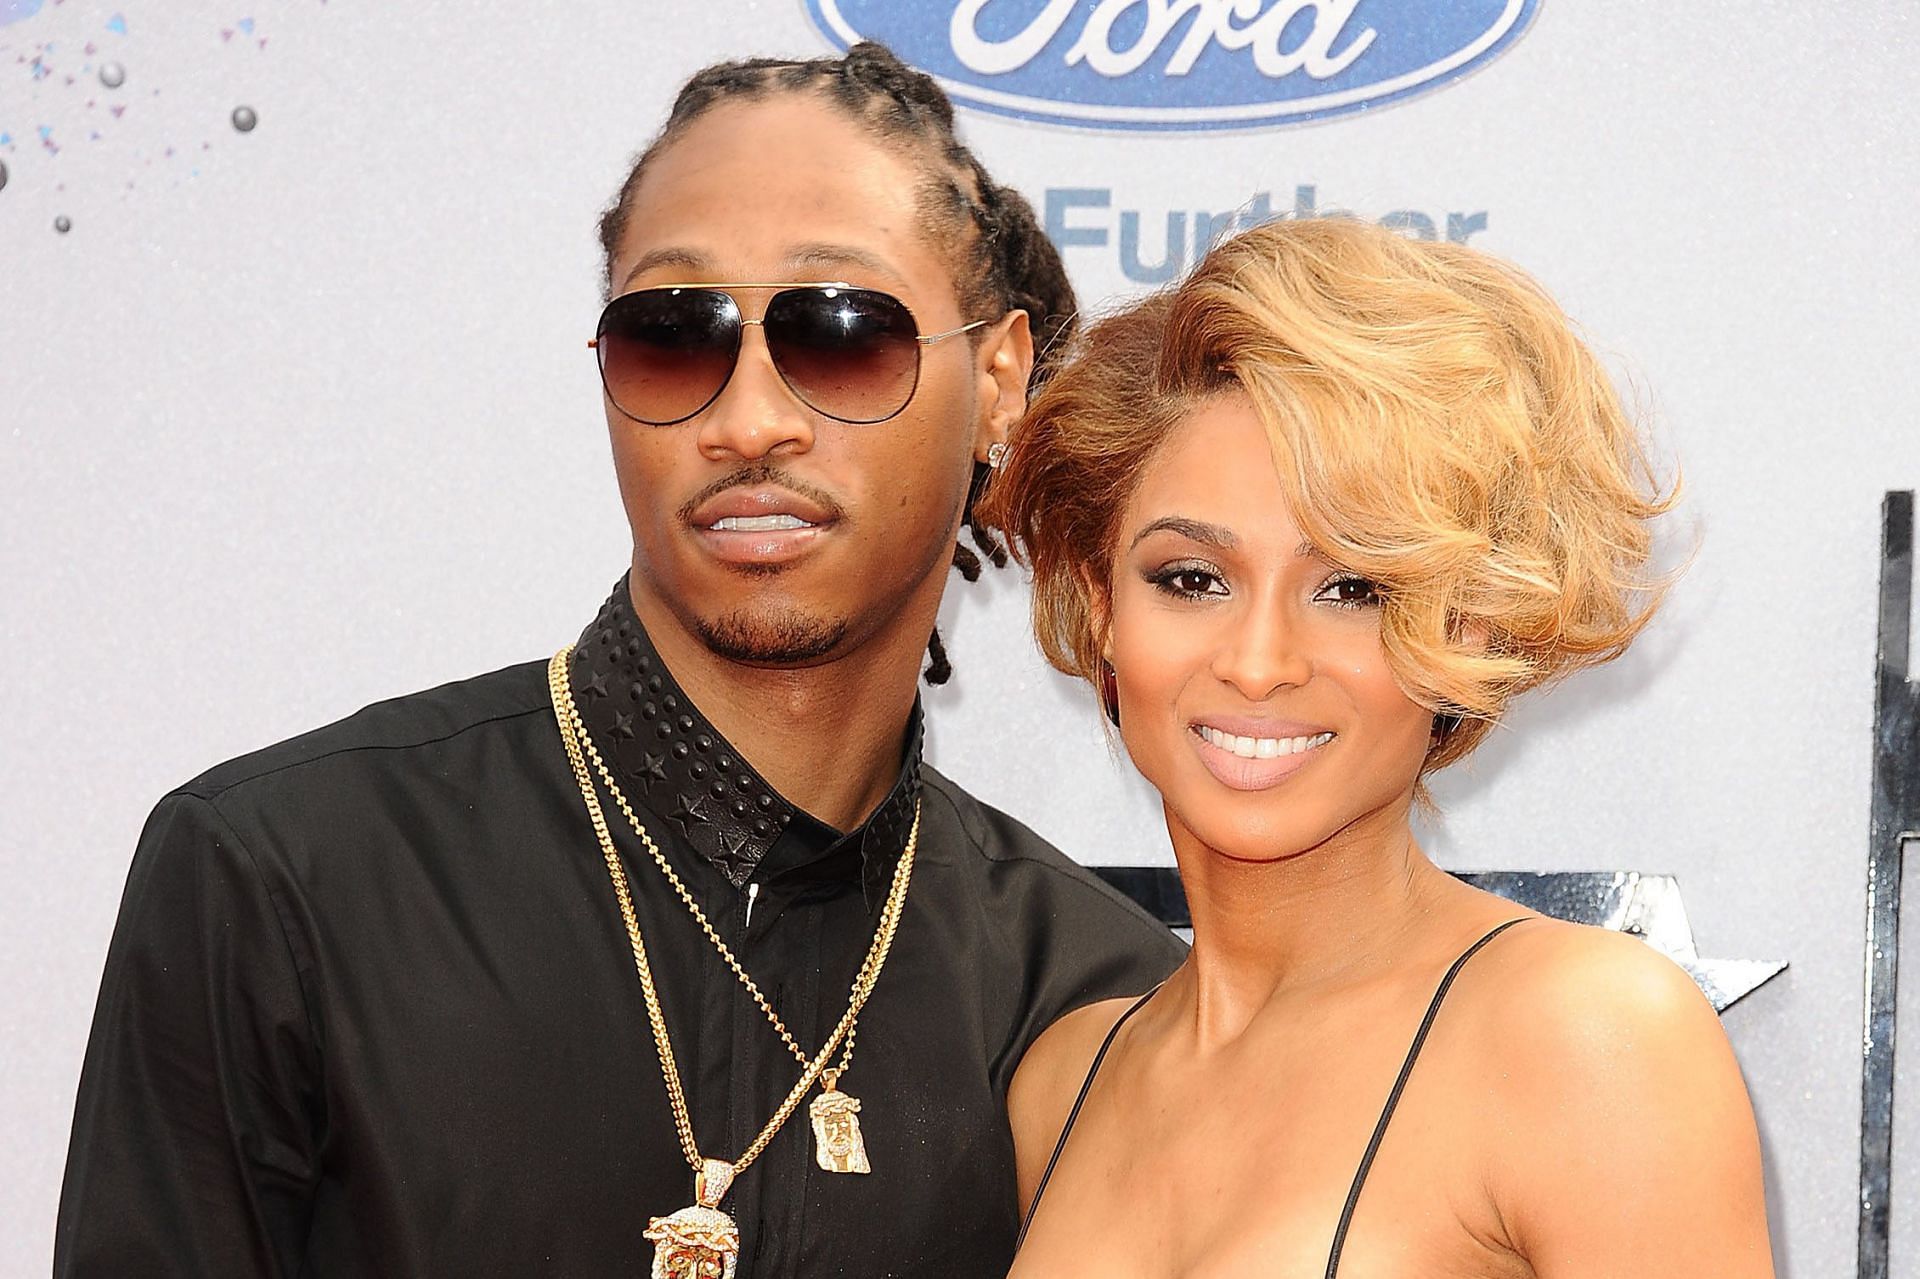 Ciara is suing her ex-fianc&eacute; Future for calling her a bad mother. Photo via pagesix.com